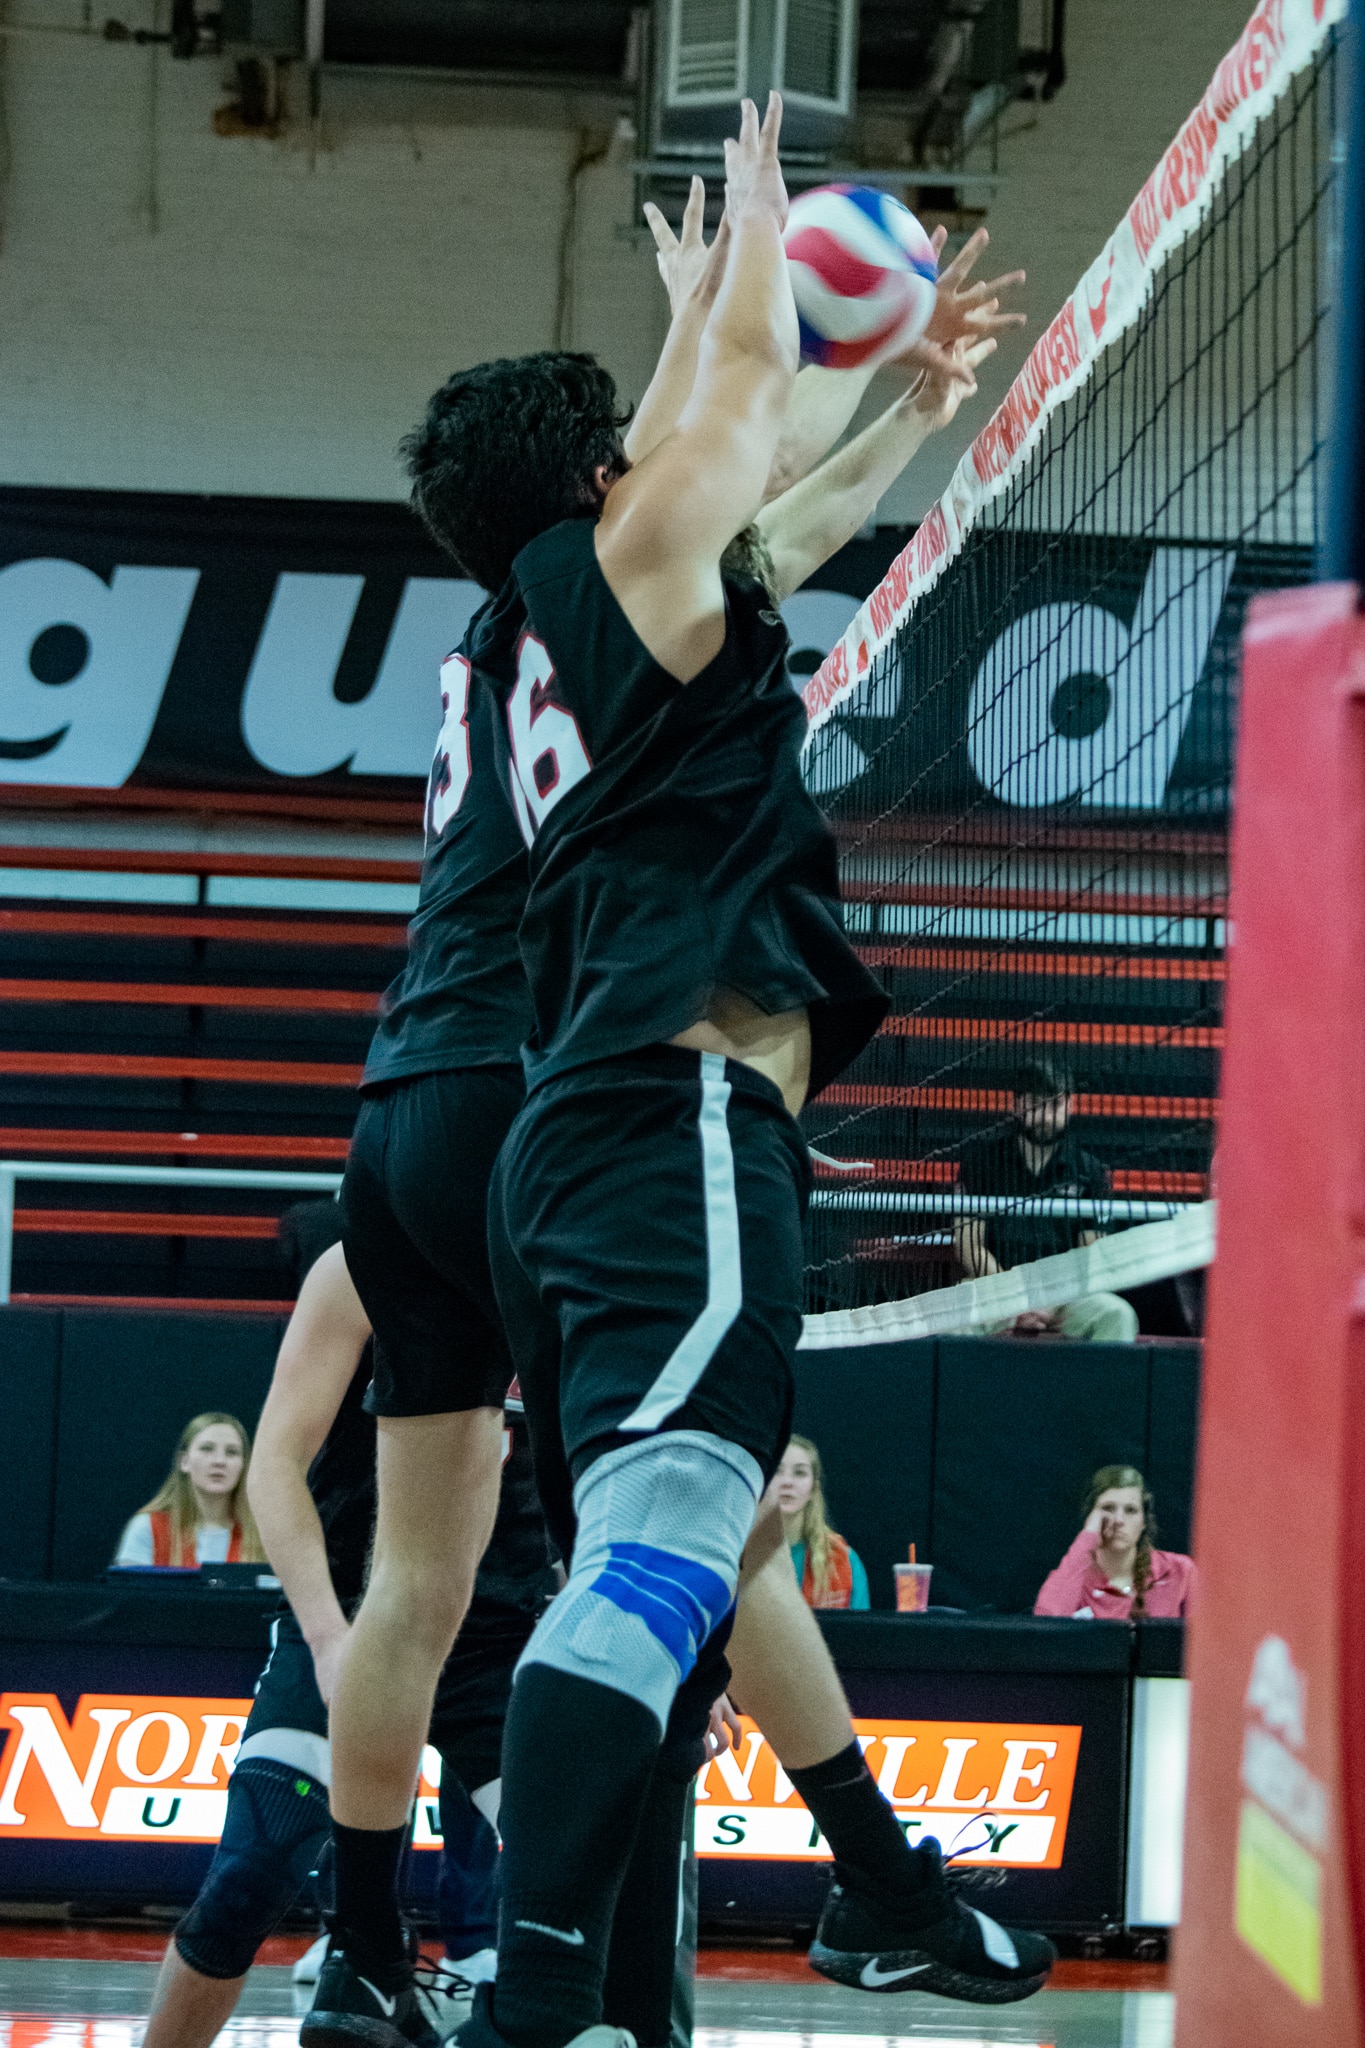 Hamsho (13) and Carrillo (16) jump up simultaneously in order to block the ball.